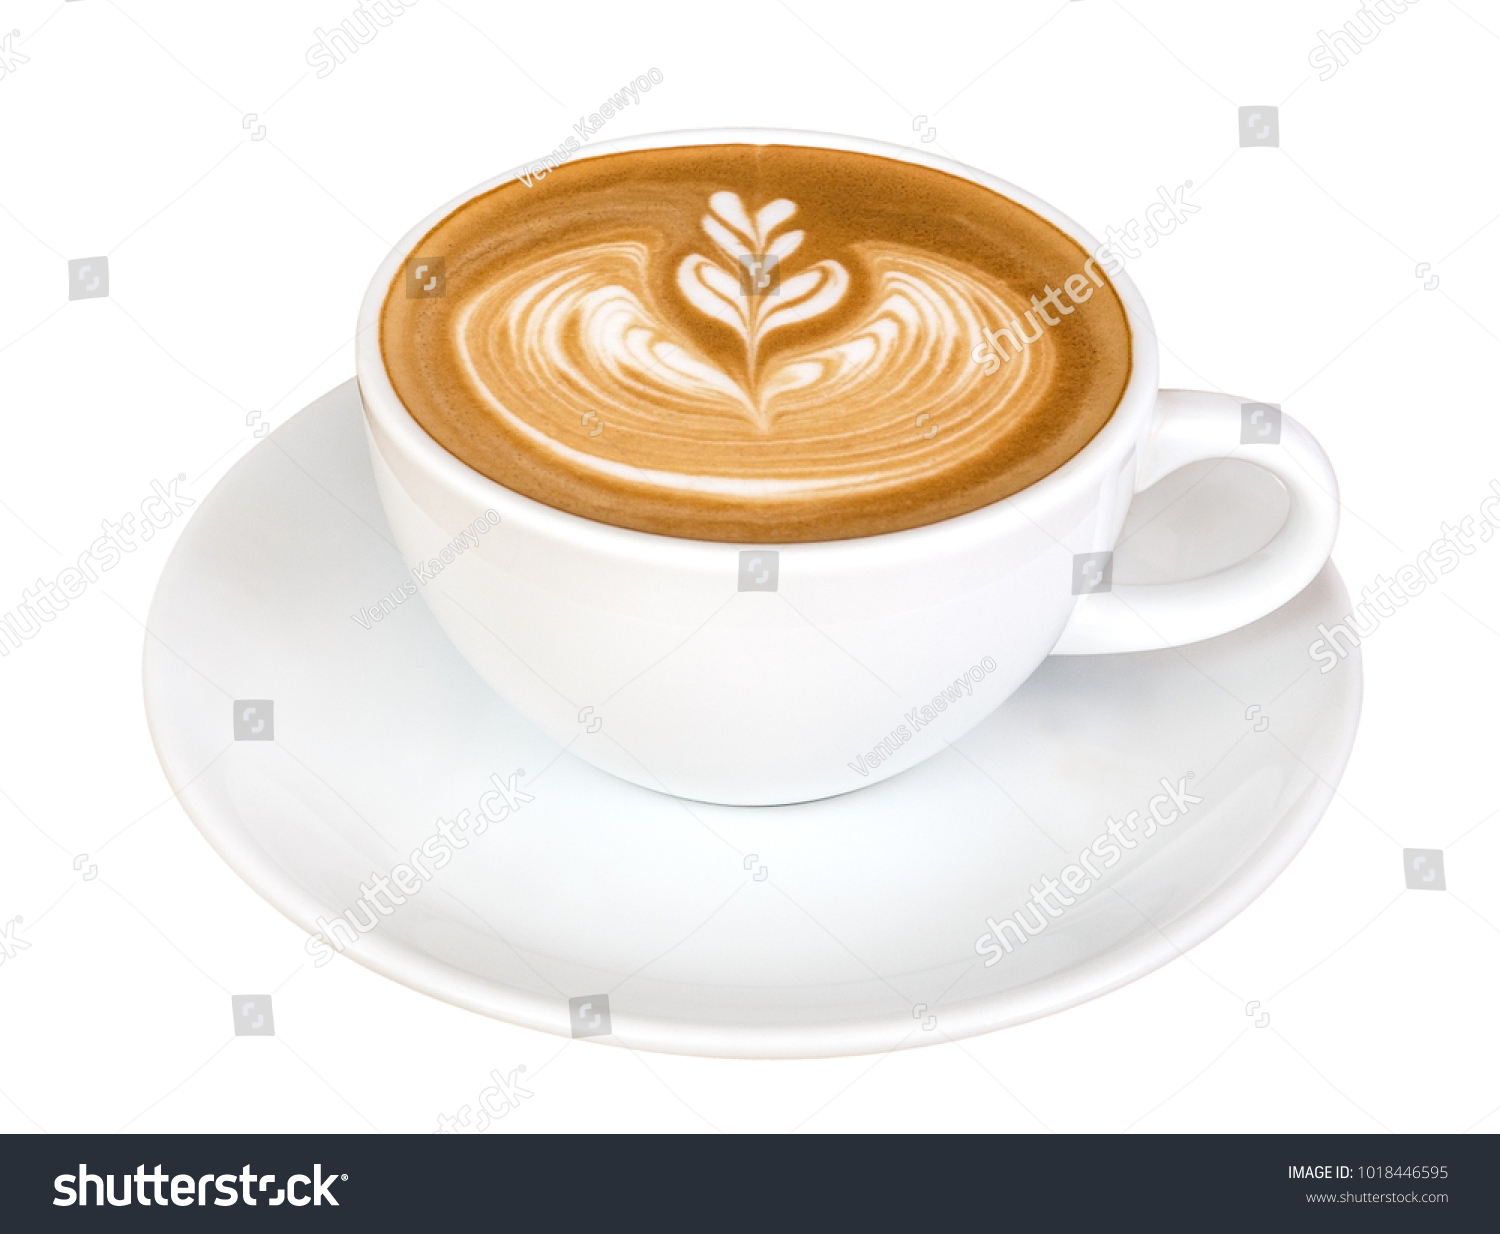 Hot coffee cappuccino latte art isolated on white background, clipping path included #1018446595